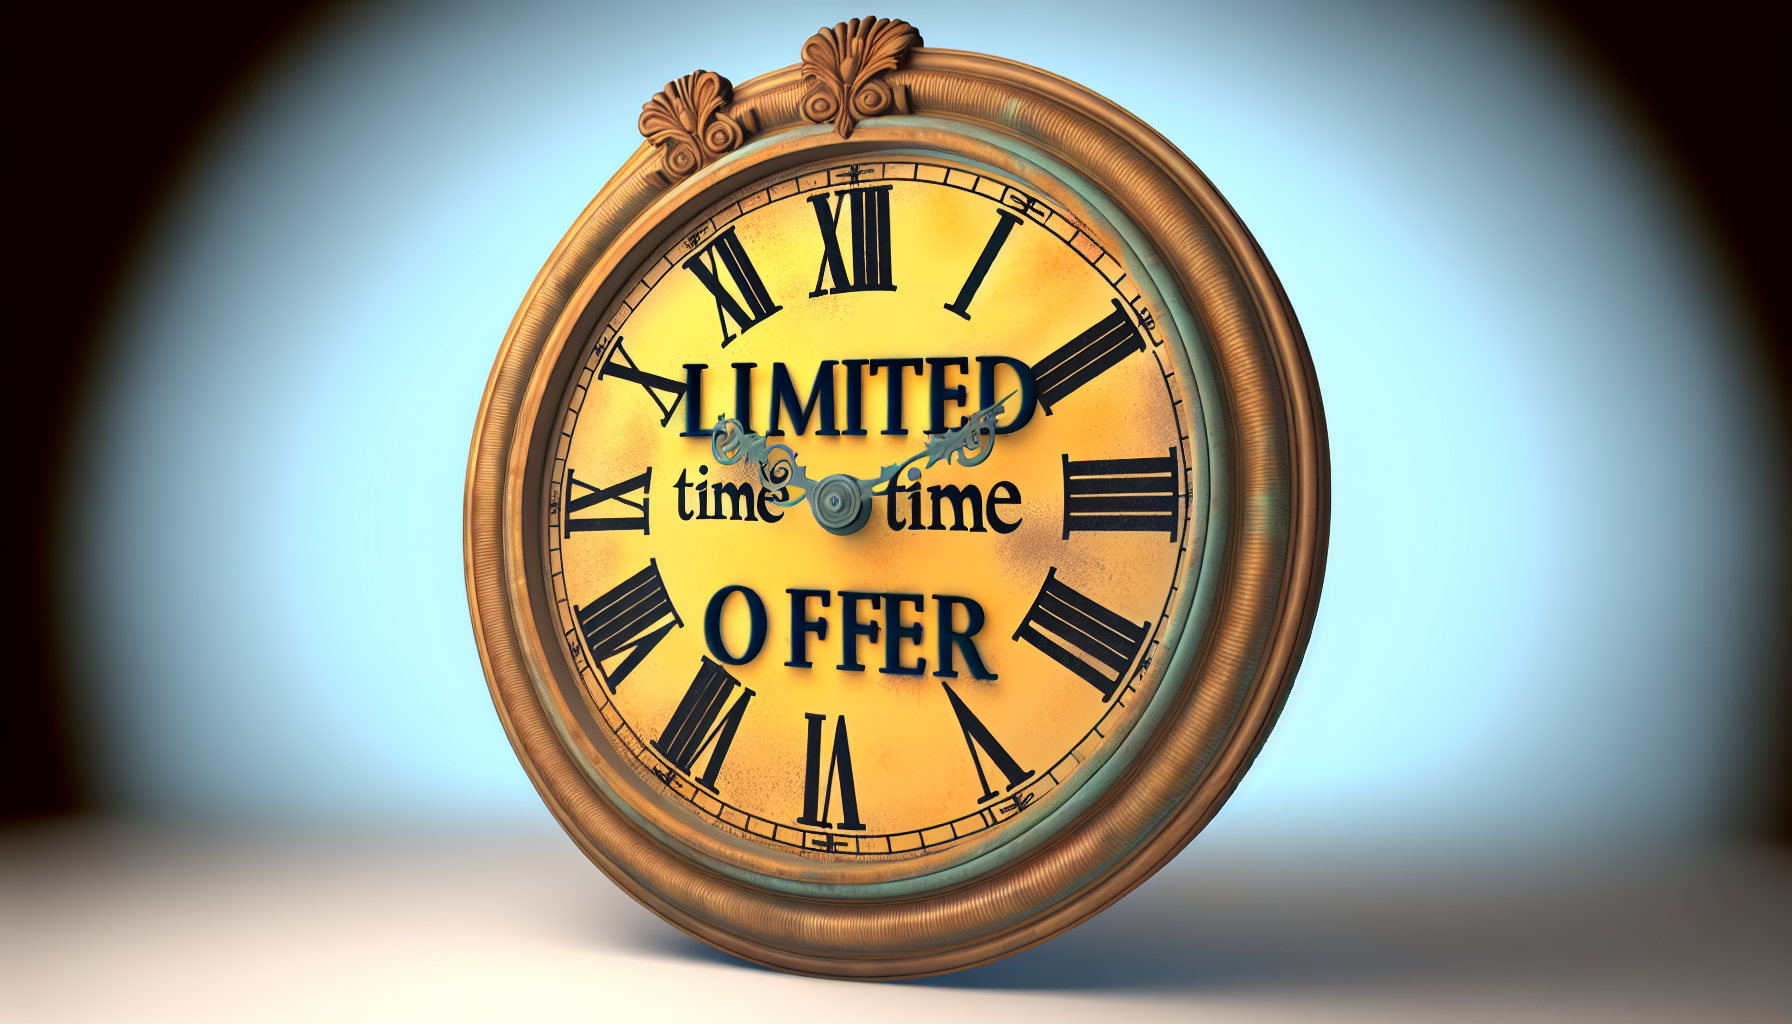 Creating a Sense of Urgency: An image of a clock with words 'Limited Time Offer' to illustrate the concept of urgency in marketing.